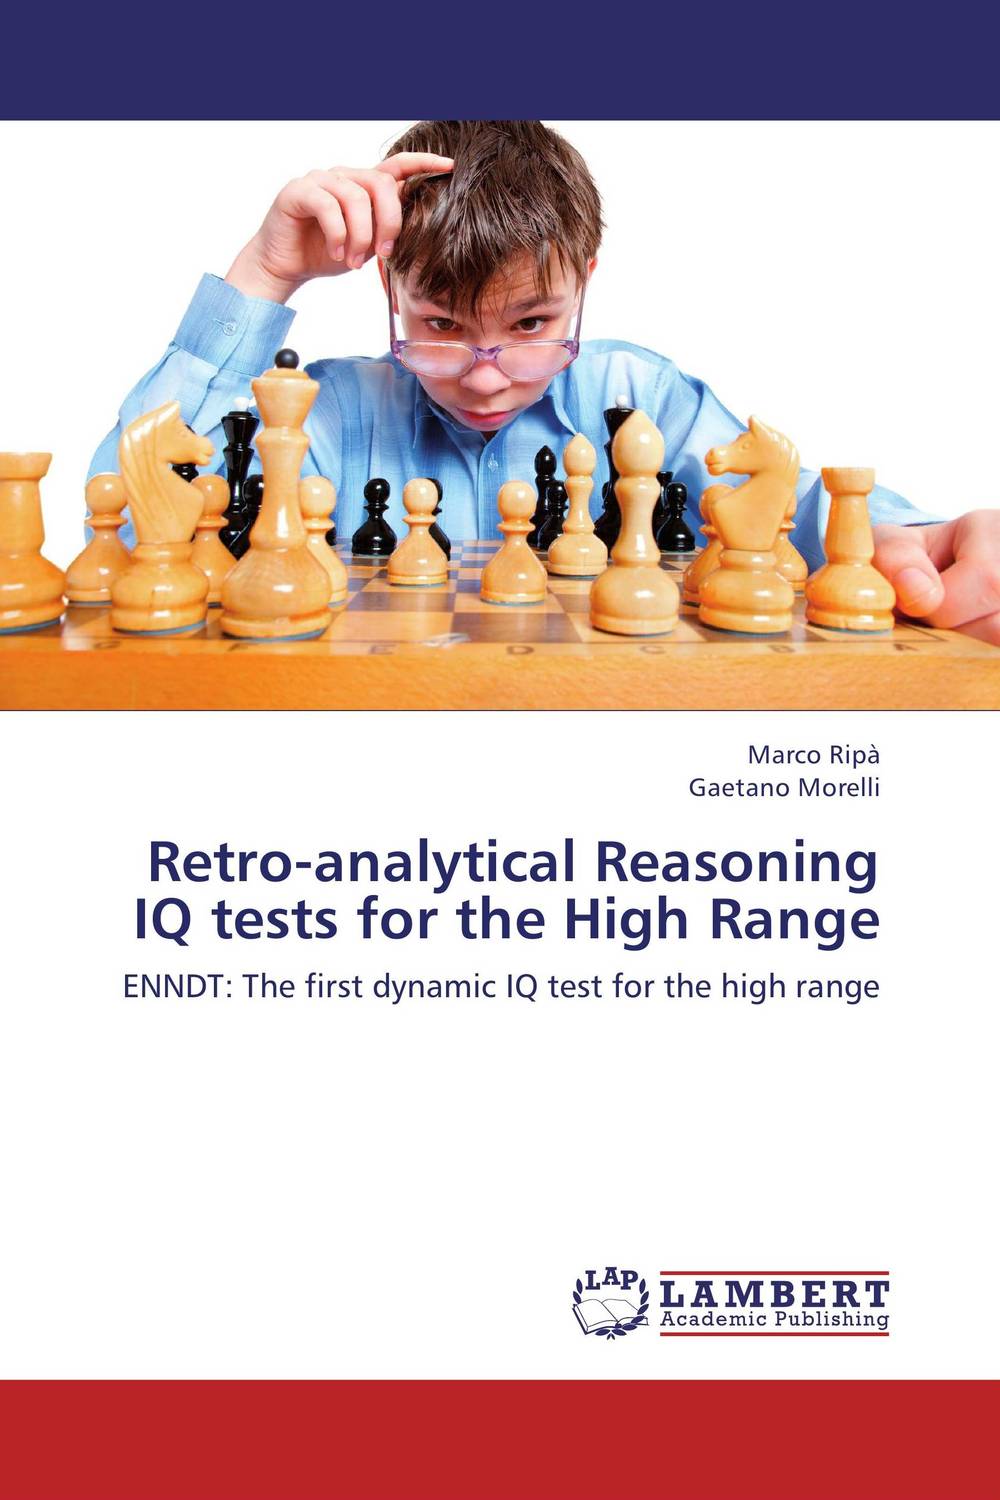 Retro-analytical Reasoning IQ tests for the High Range